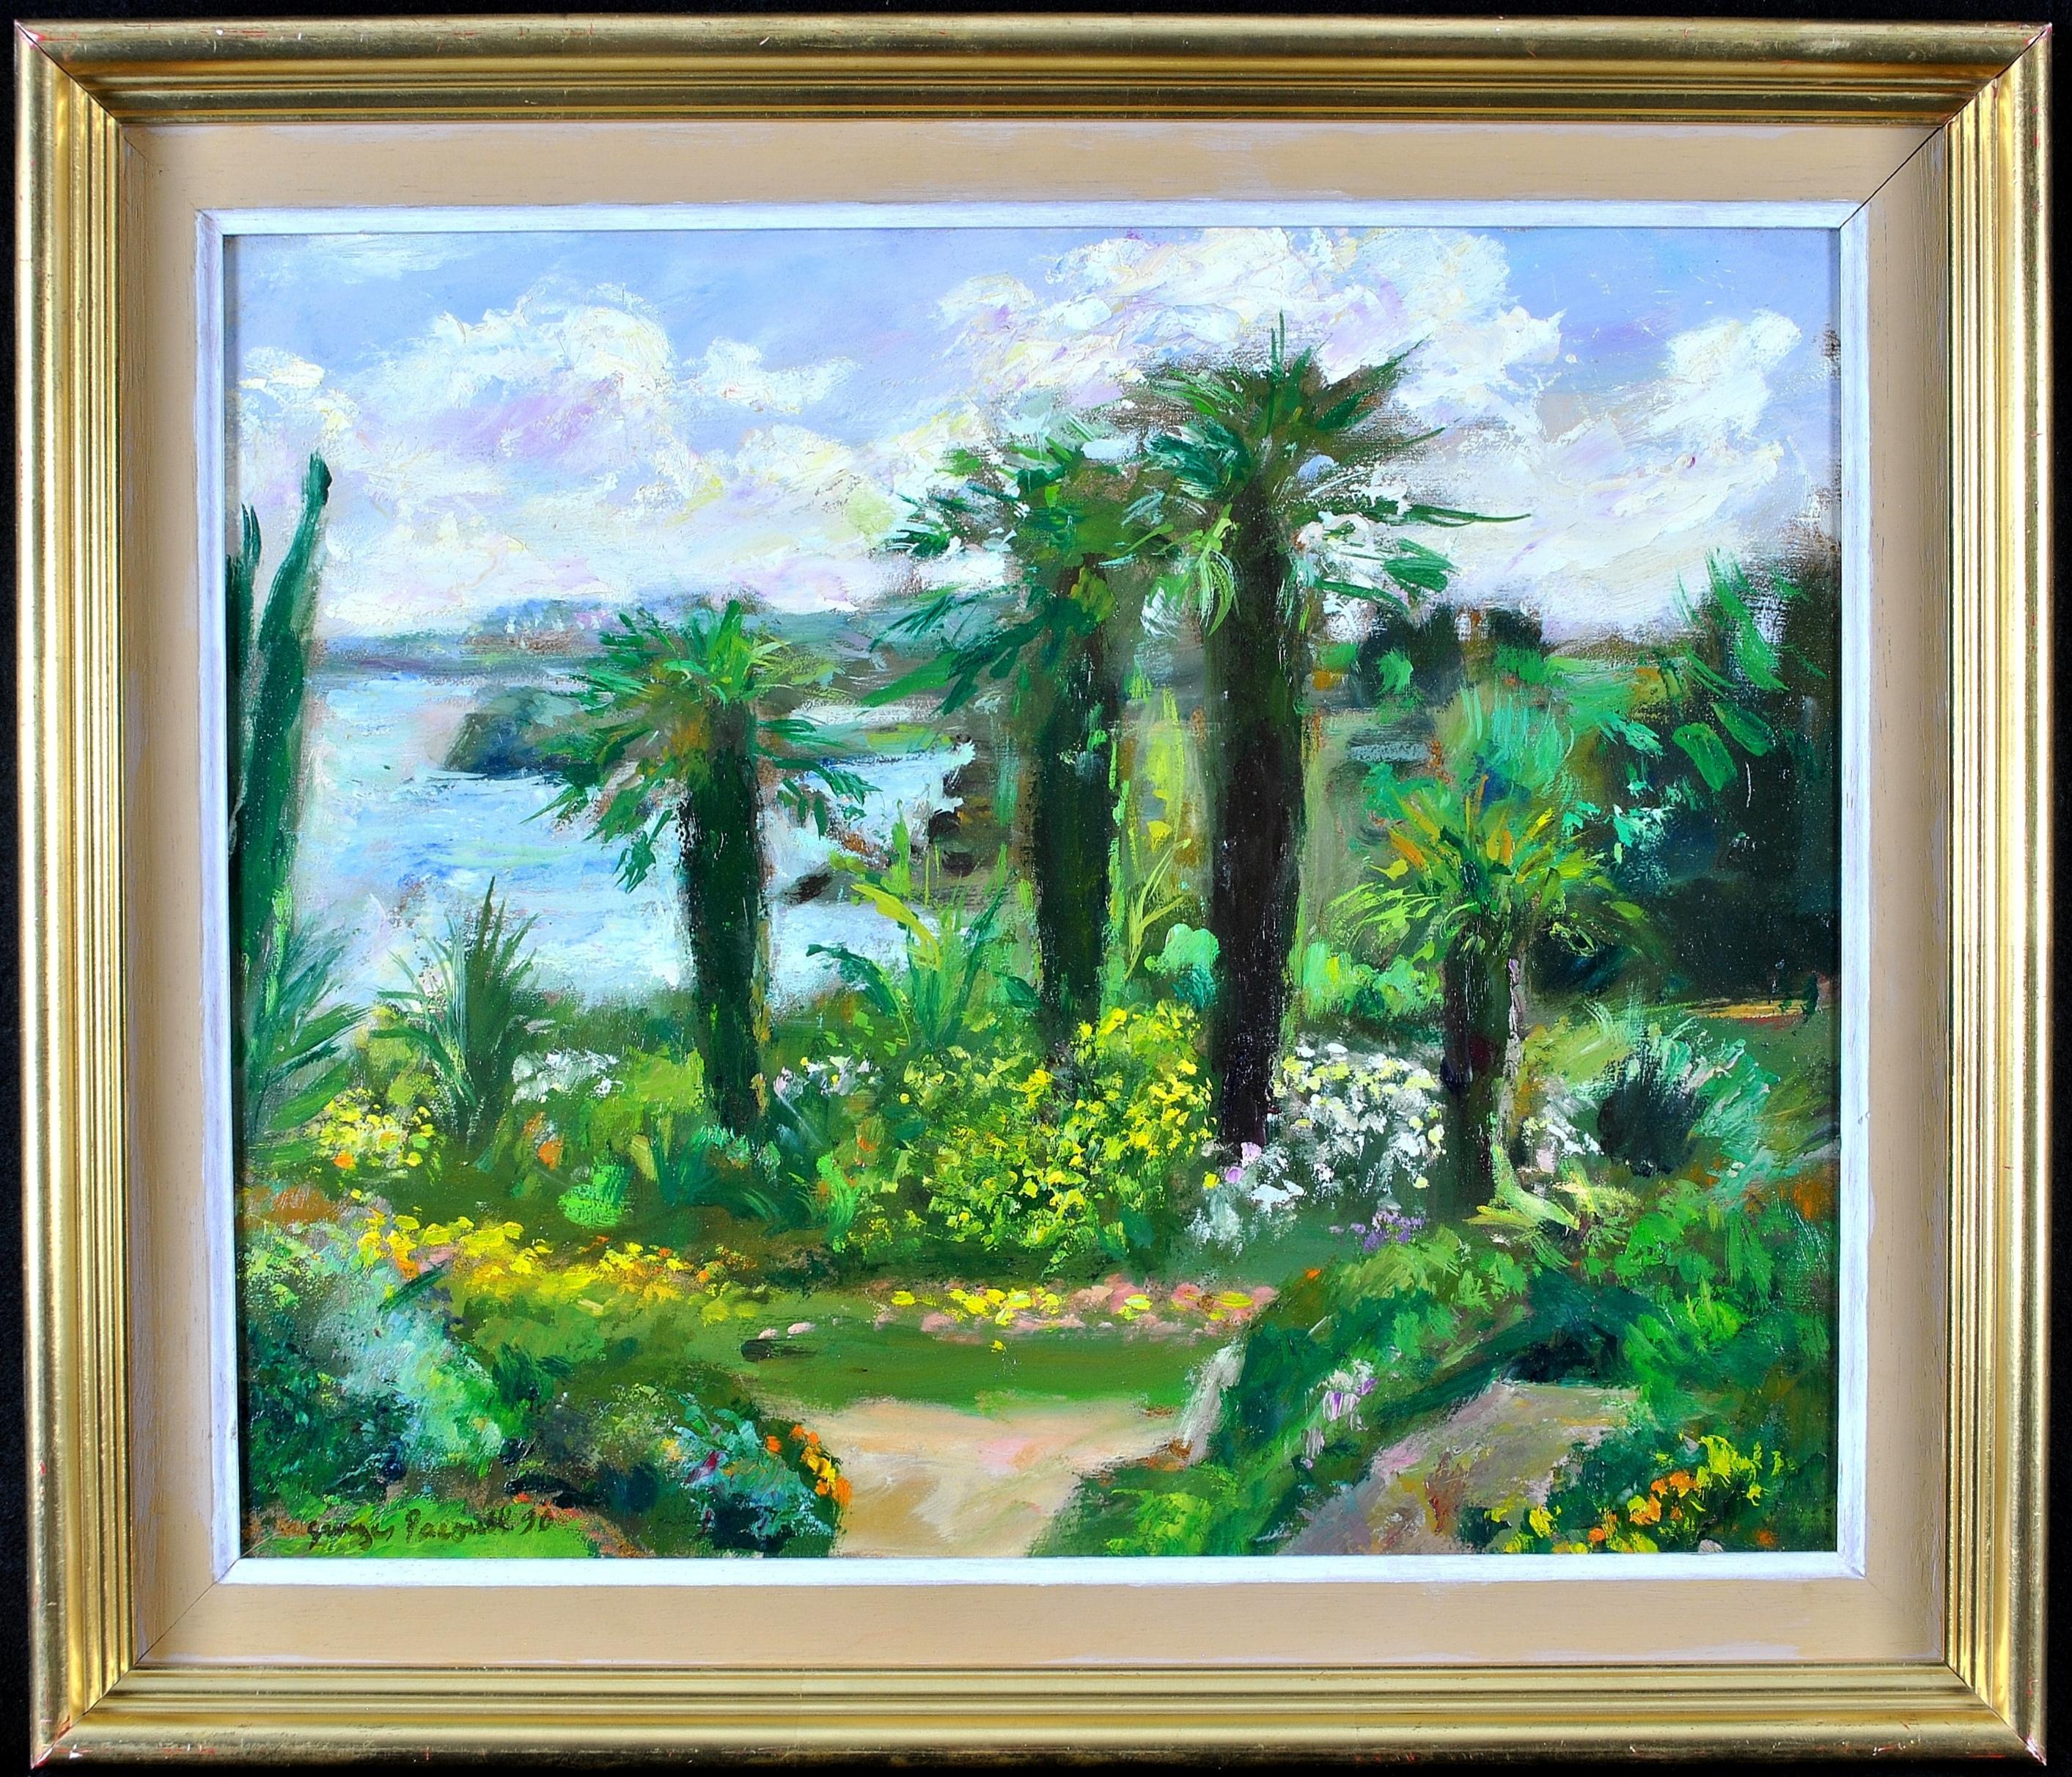 Georges Pacouil Landscape Painting - Côte d'Azur Palm Trees - French Riviera South of France Landscape Oil Painting